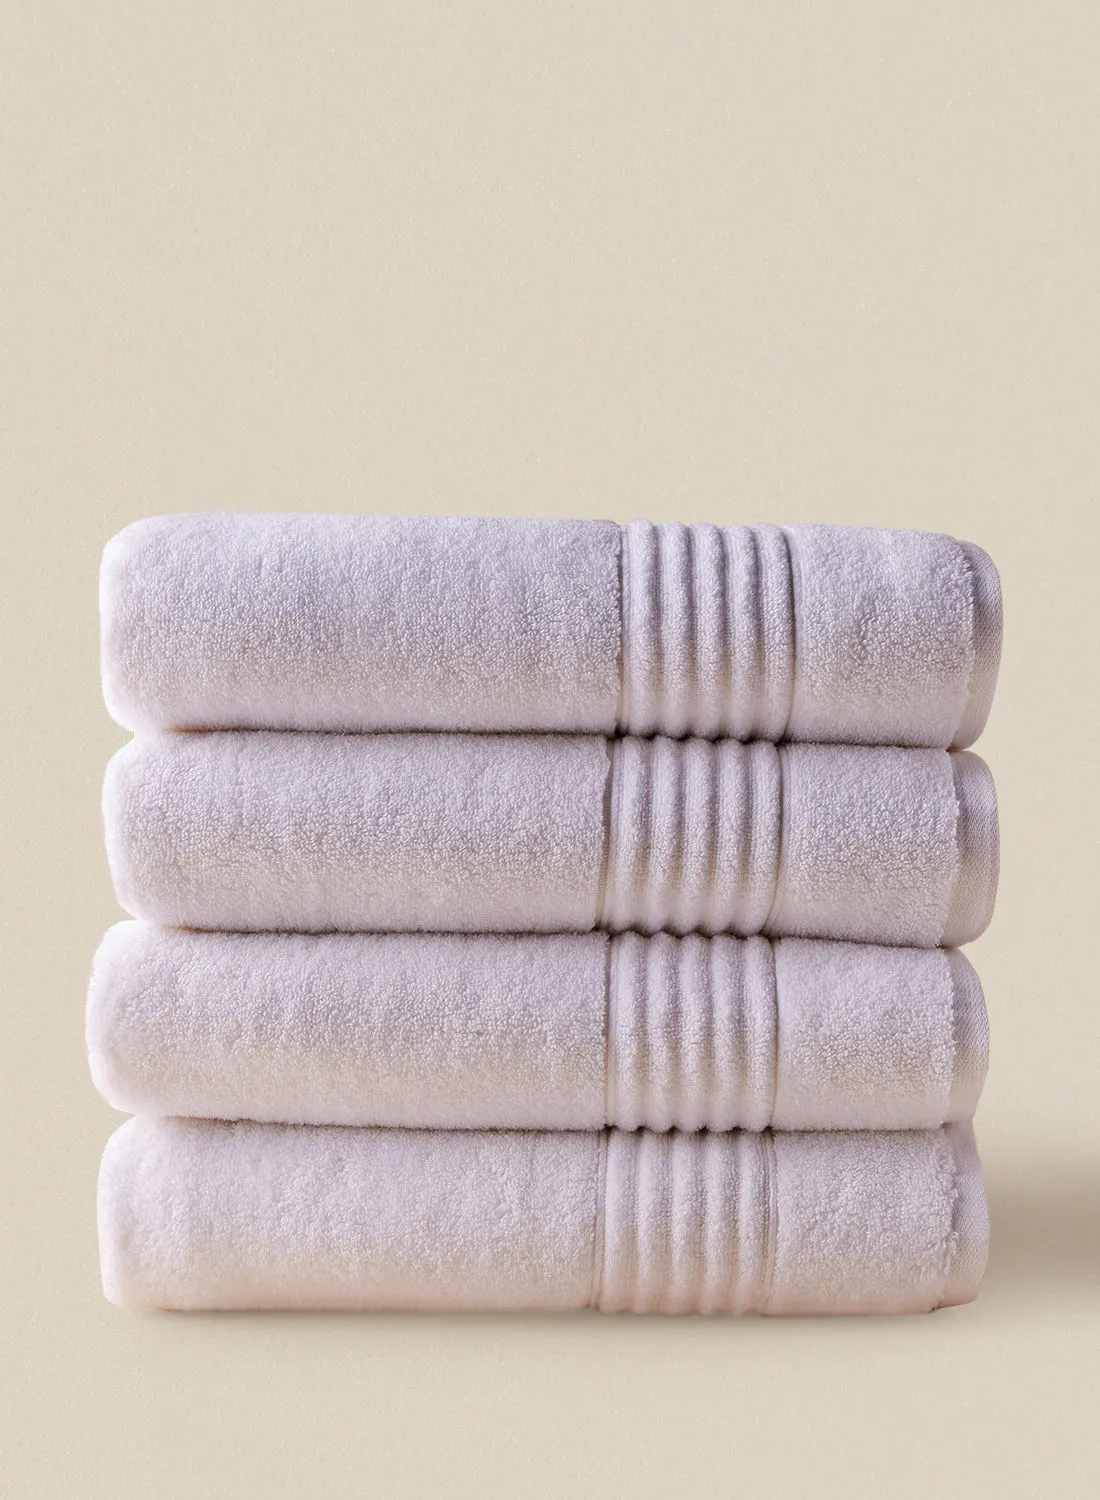 noon east 4 Piece Bathroom Towel Set - 500 GSM 100% Cotton - 4 Bath Towel - White Color - Highly Absorbent - Fast Dry